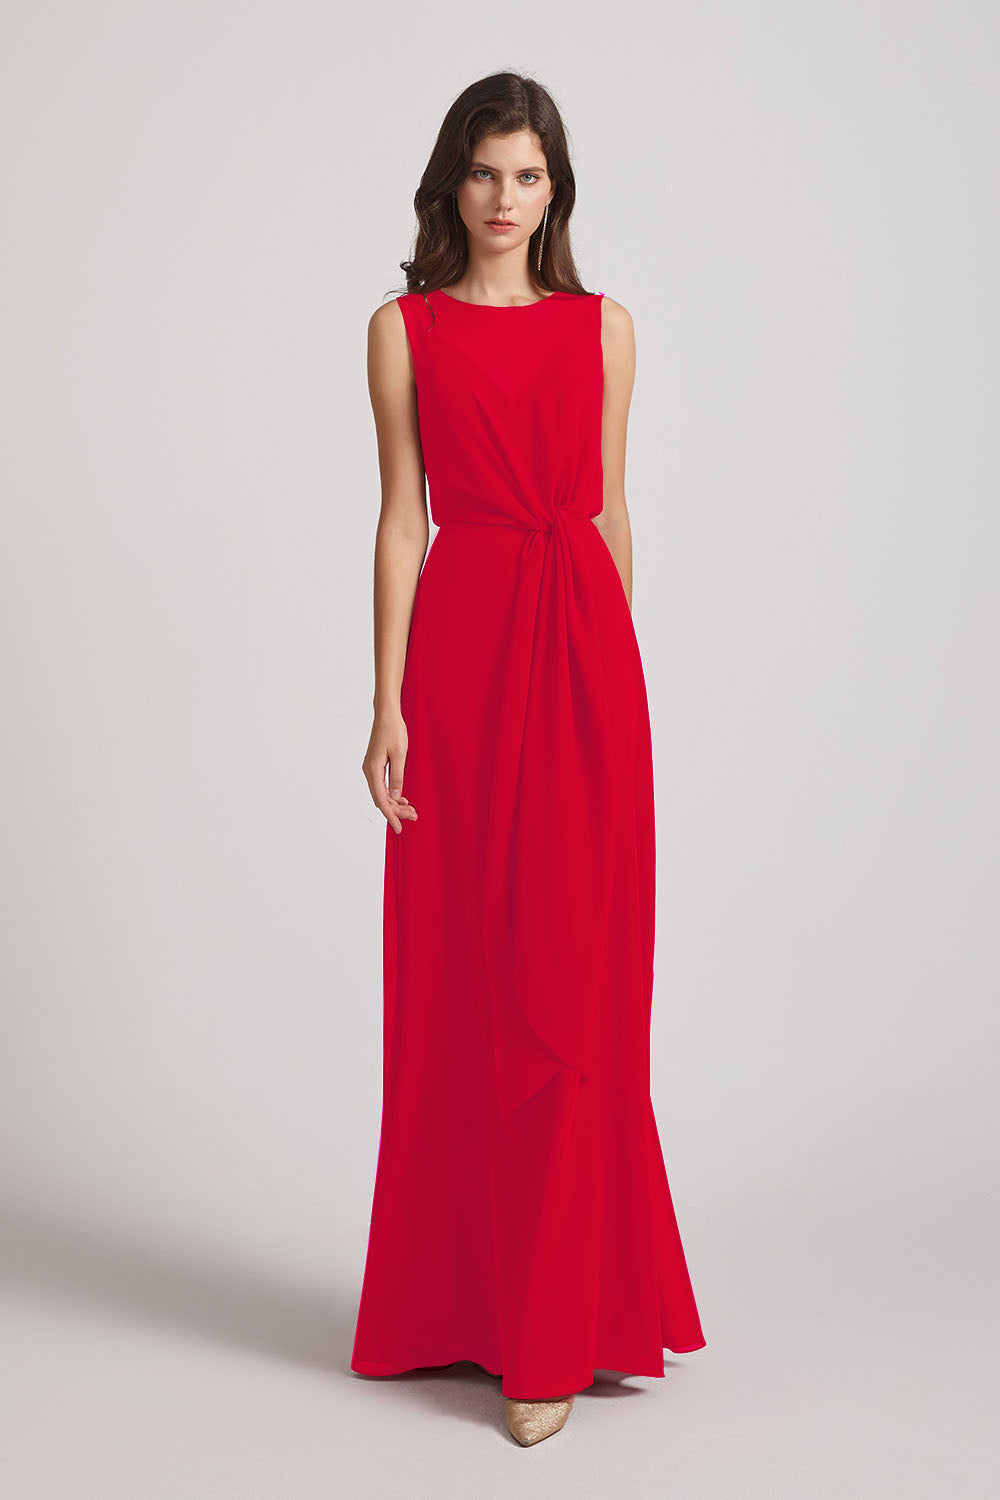 Alfa Bridal Red Boat Neckline Bridesmaid Dresses with Waist Tie and Back Keyhole (AF0089)